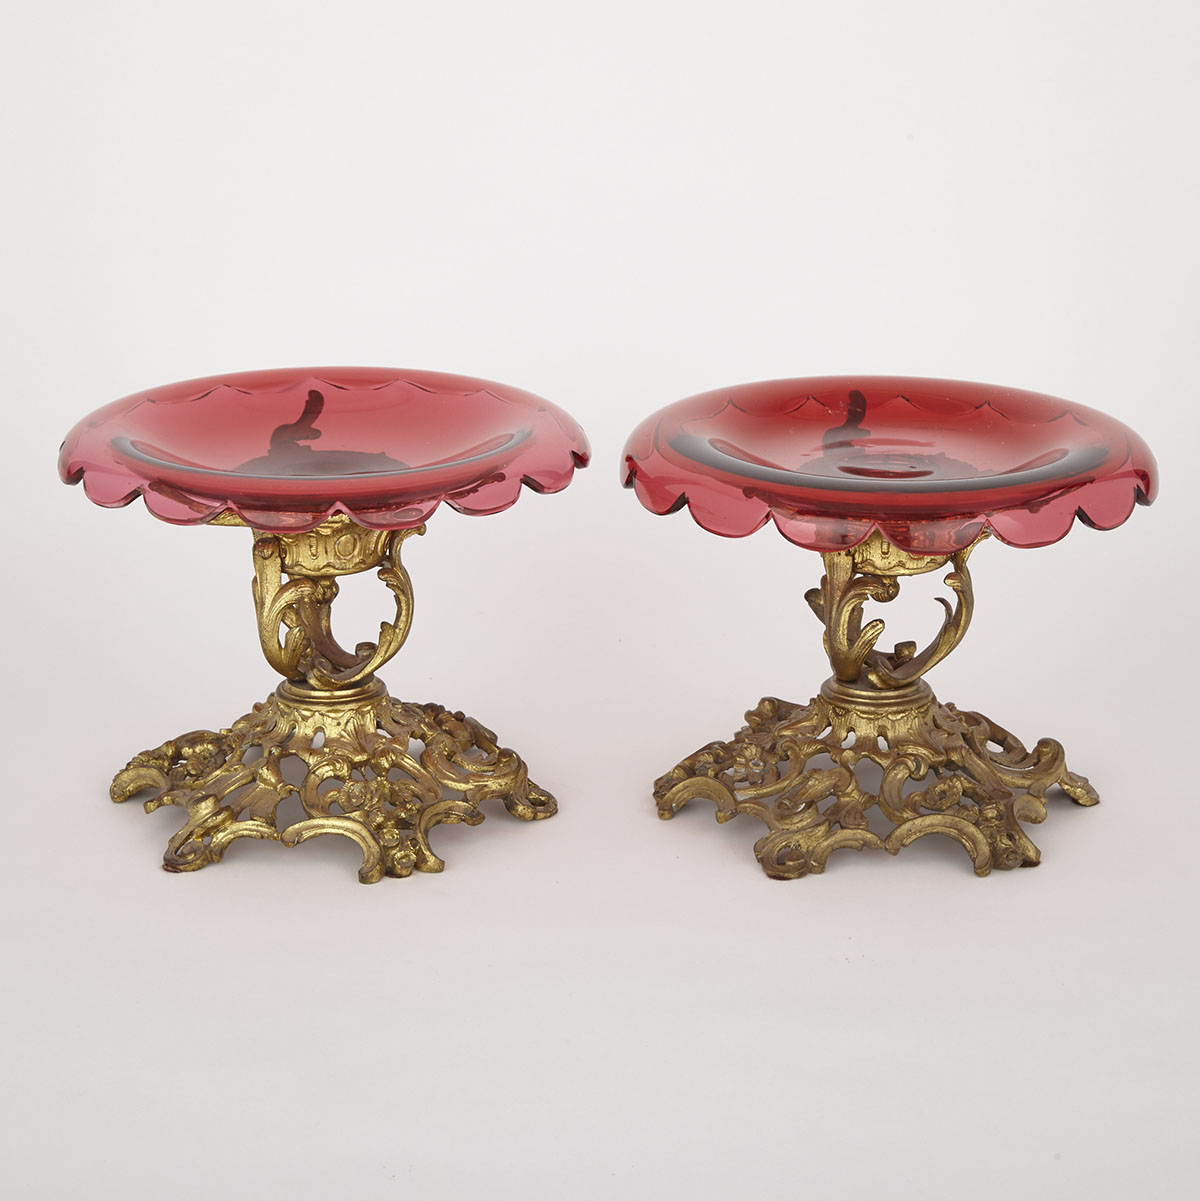 Pair of Cut Ruby Glass Compotes on Ormolu Stands, mid 19th century